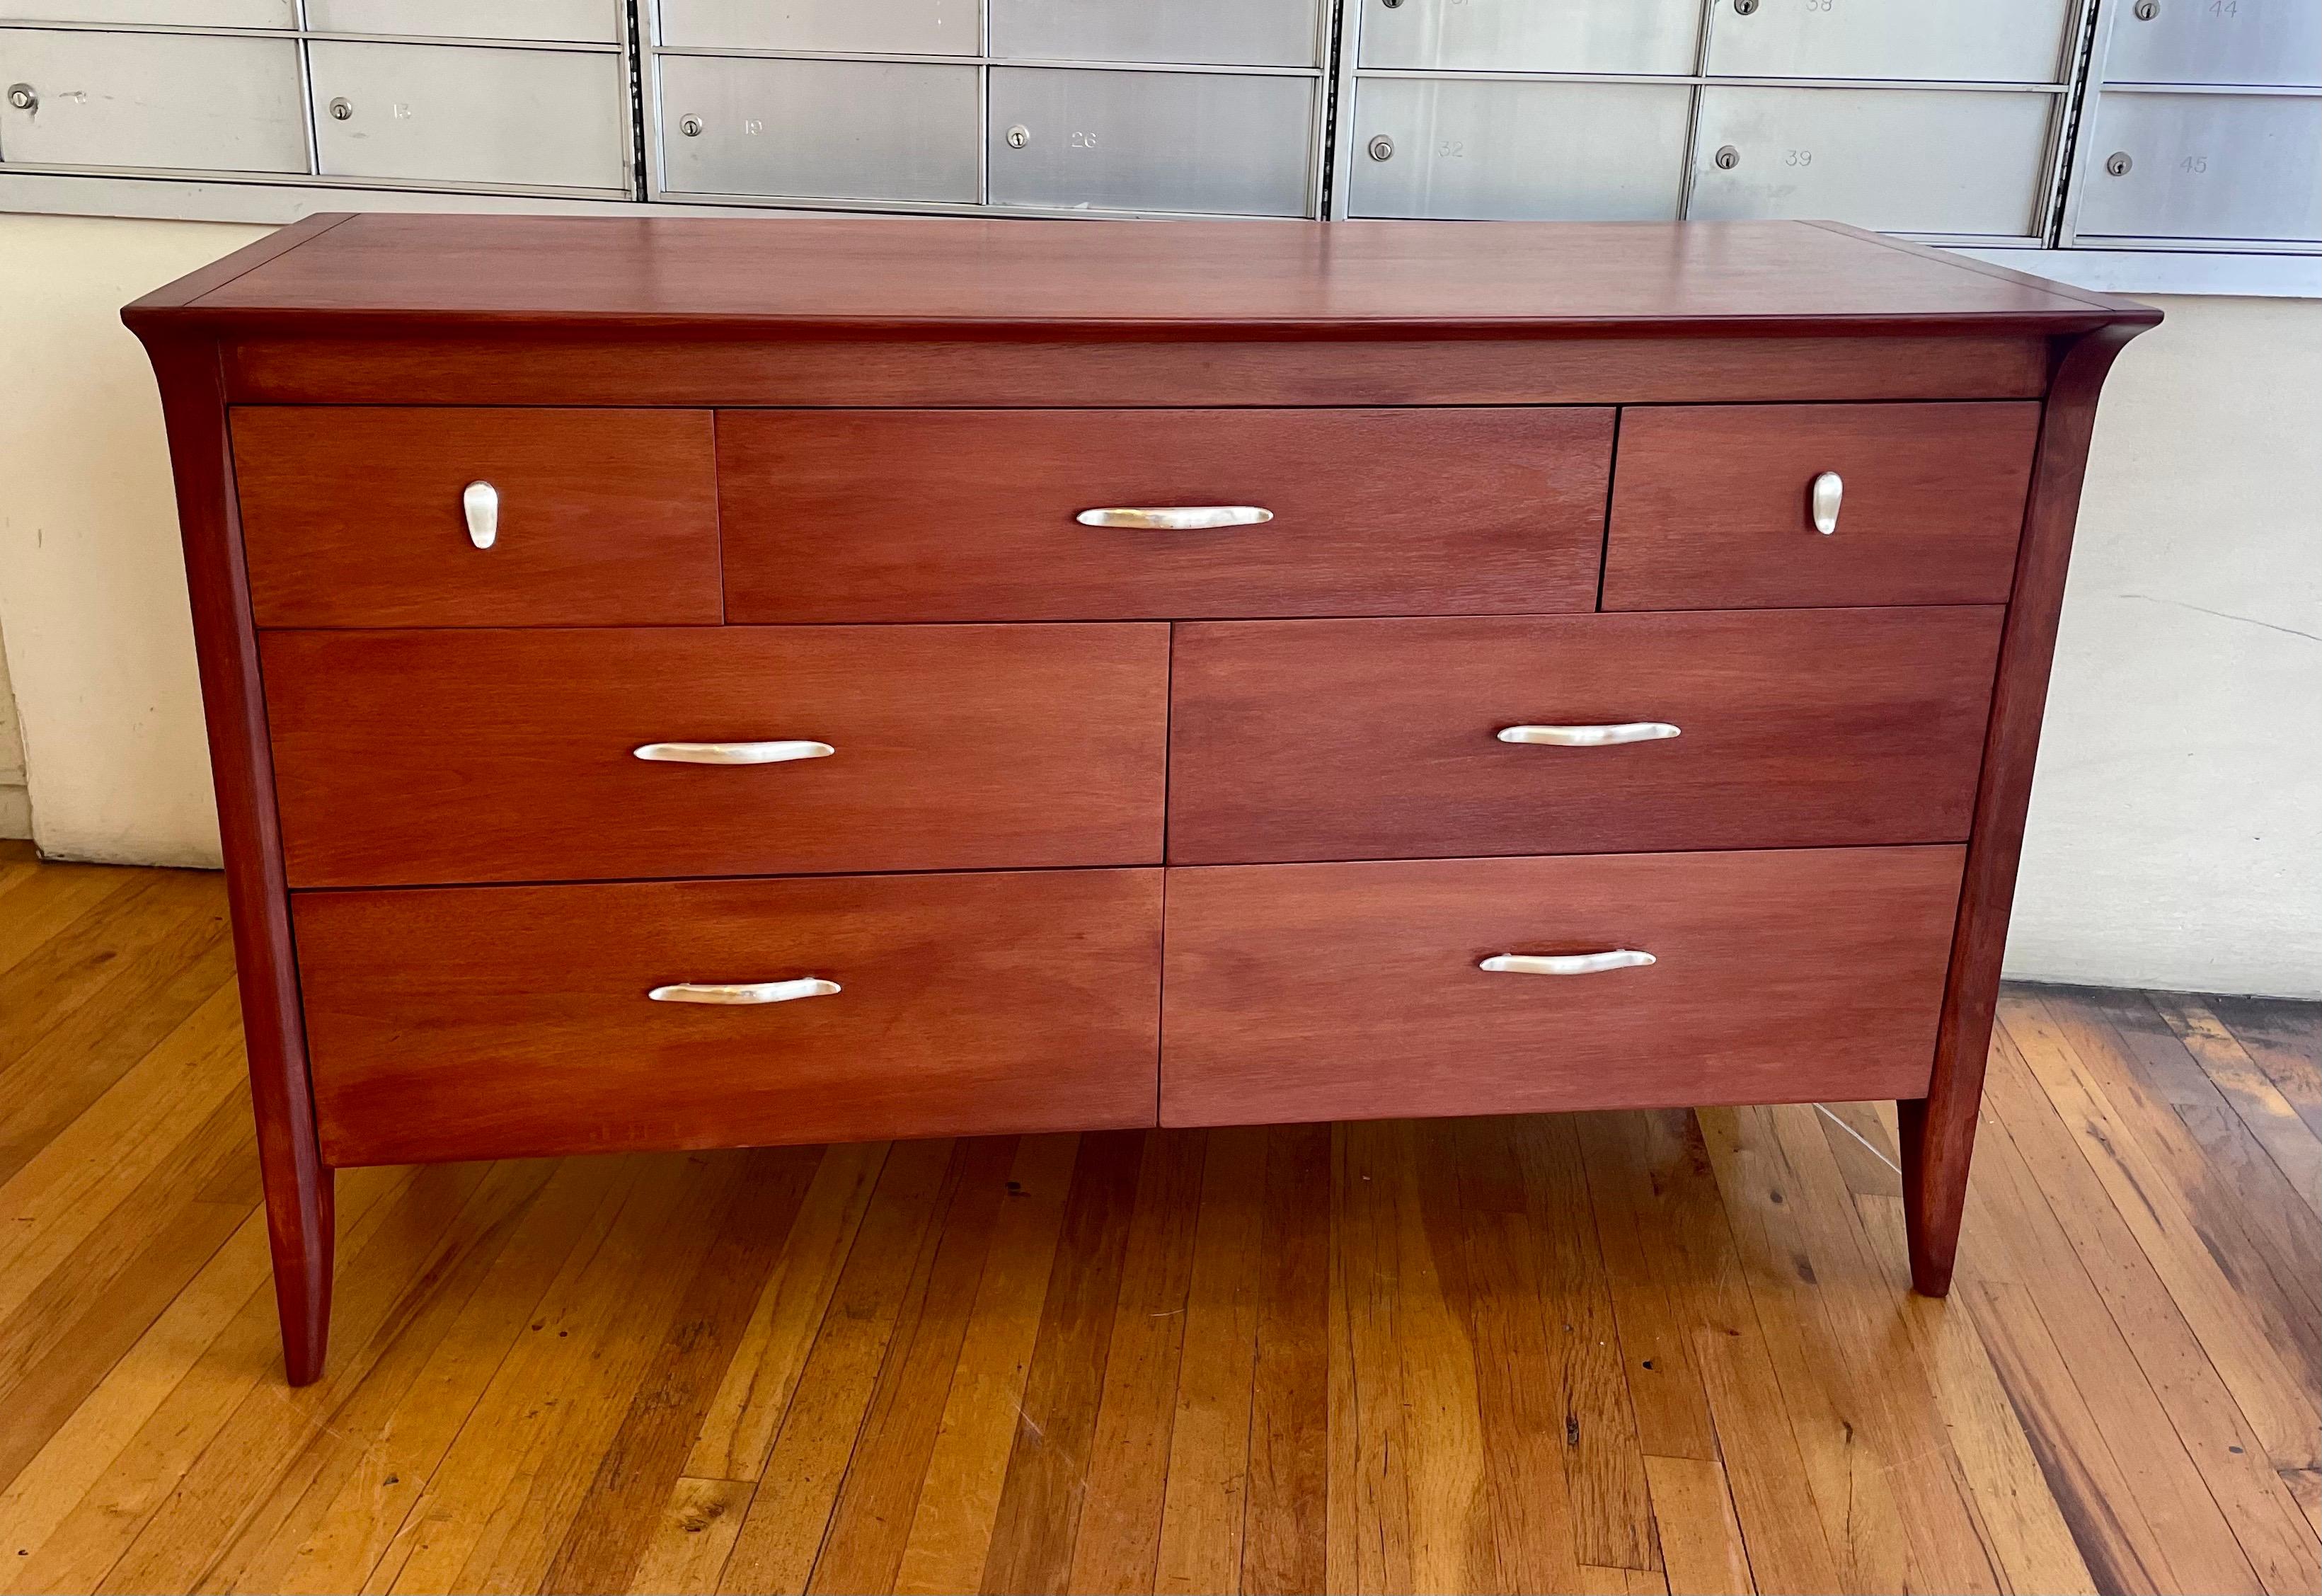 Beautiful 7 drawer dresser by Drexel designed by John Van Koert, freshly refinished in a teak/cherry finish with silver-plated polished handles. very clean part of the Drexel Profile line.